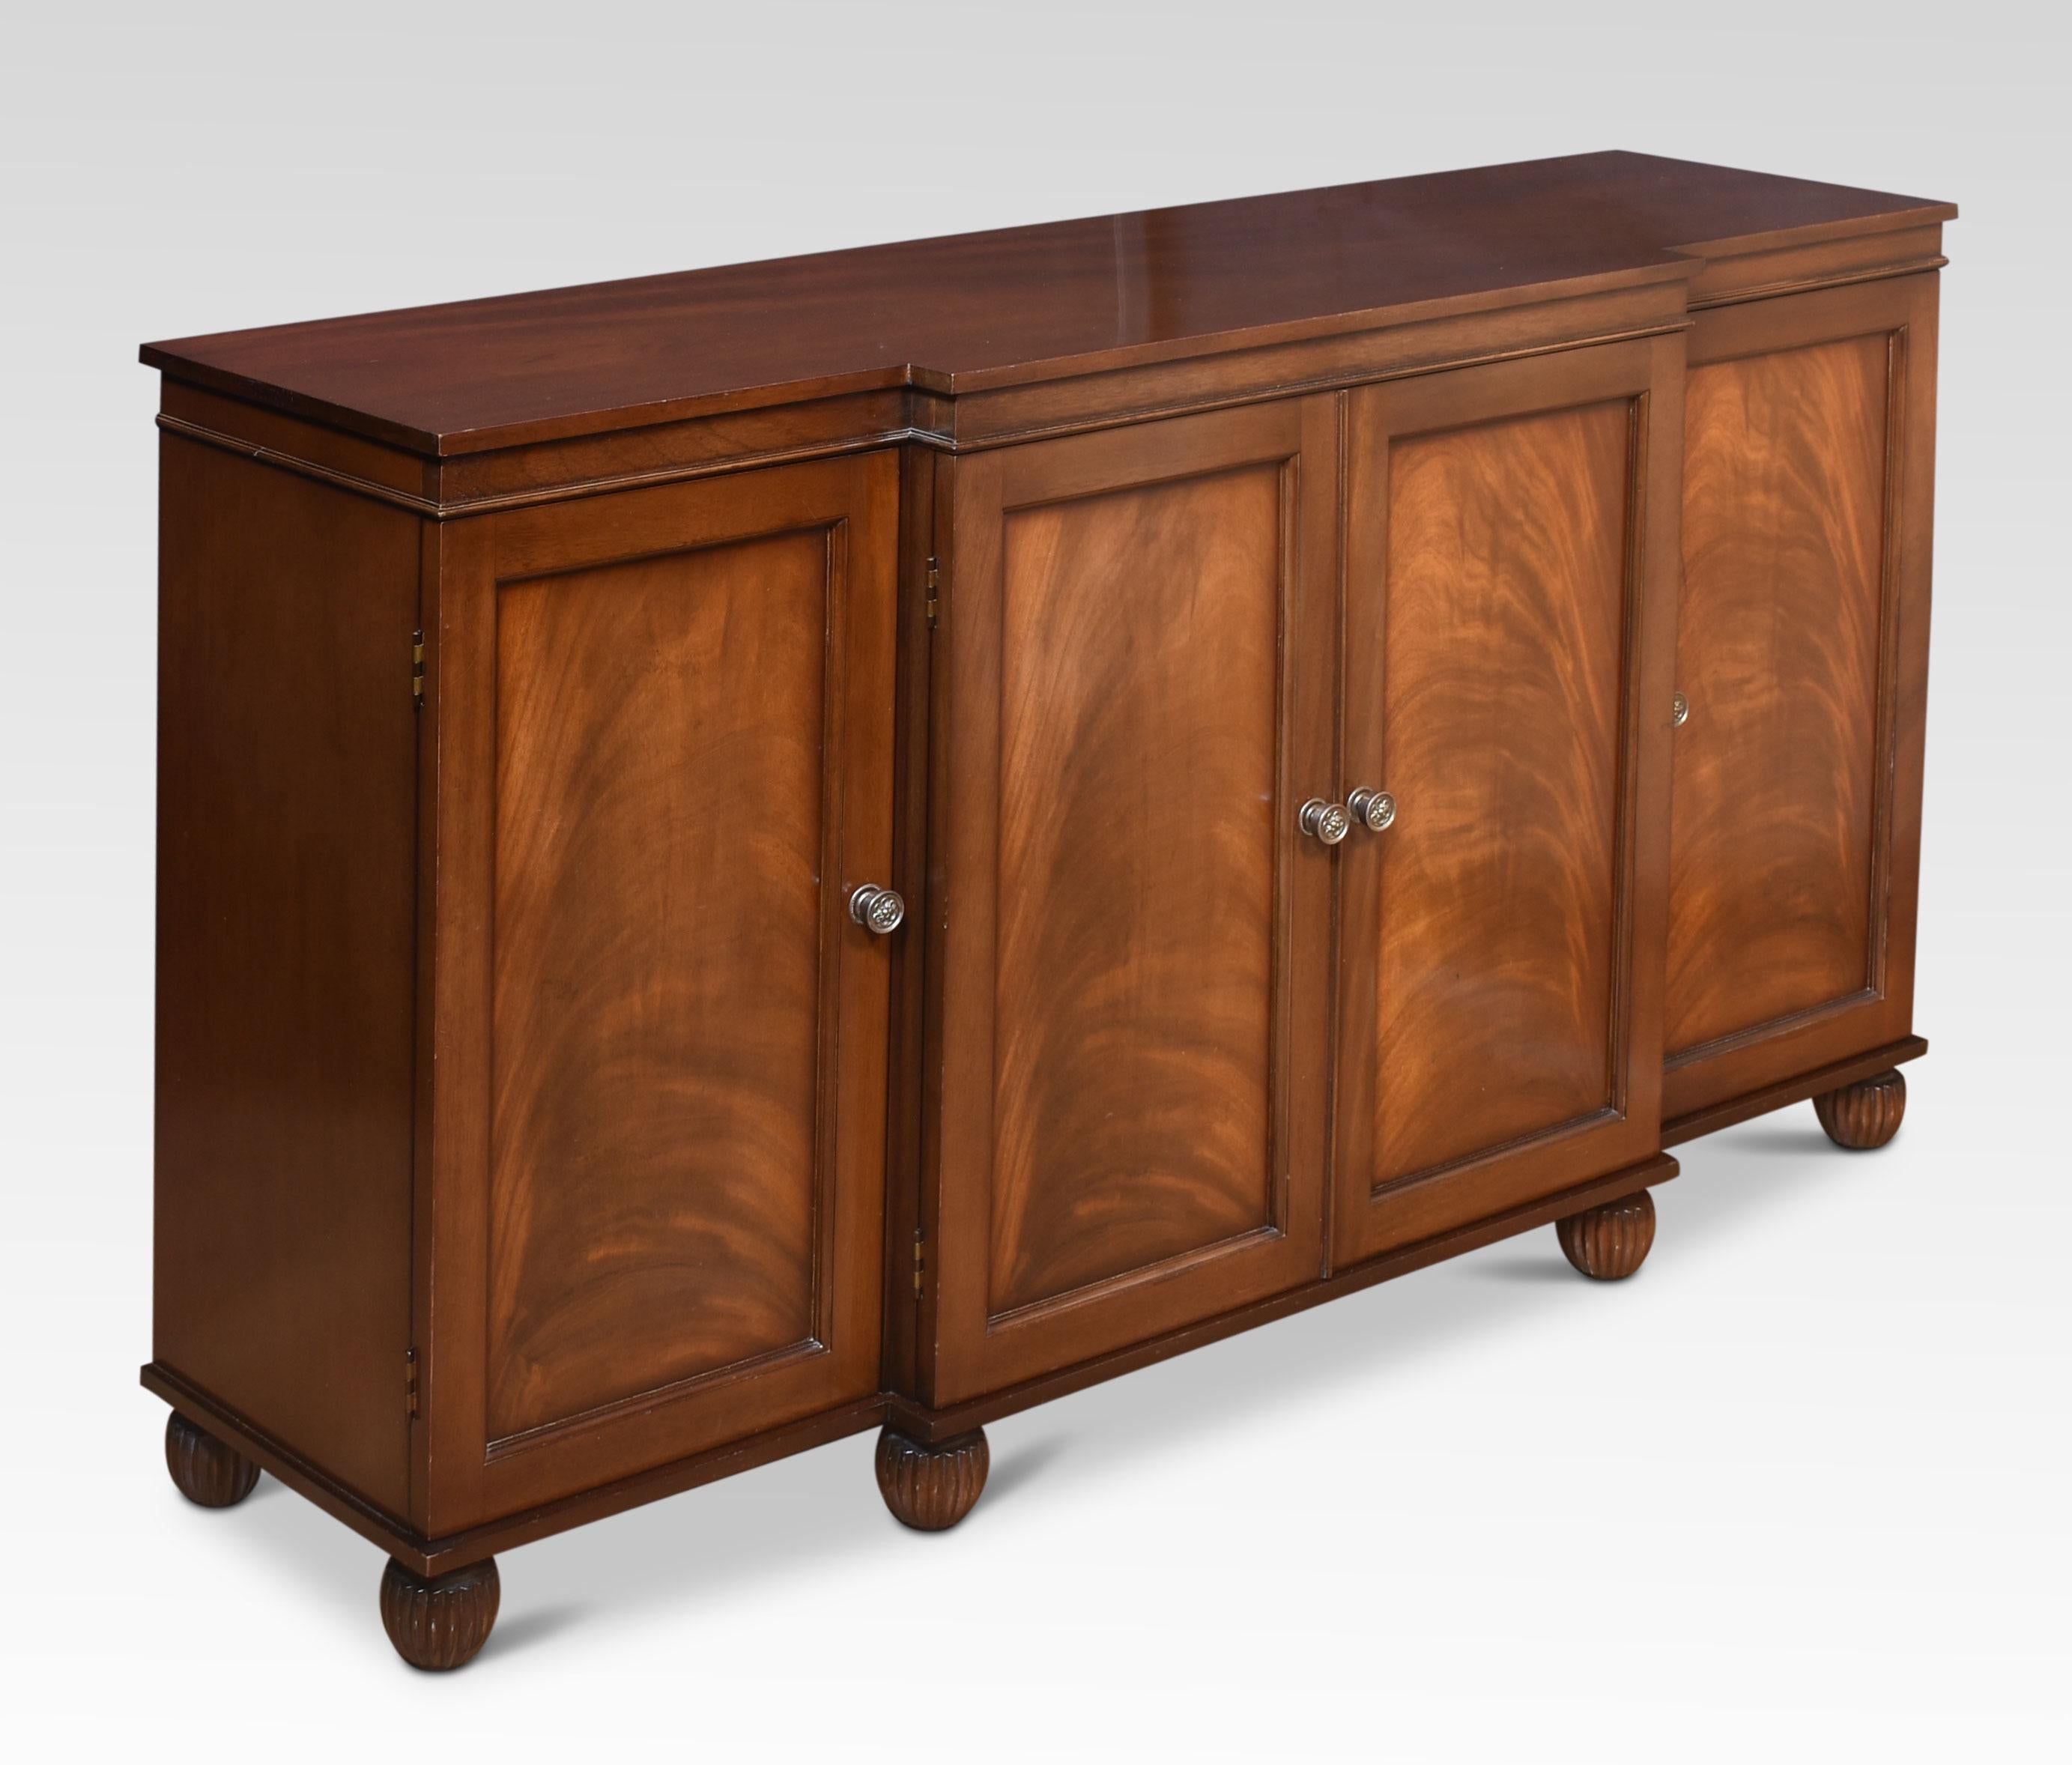 Mahogany sideboard the large rectangular mahogany breakfront top above four flame mahogany panelled doors opening to reveal the adjustable shelved interior and baize lined cutlery drawer. All raised up on turned feet.
Dimensions
Height 35